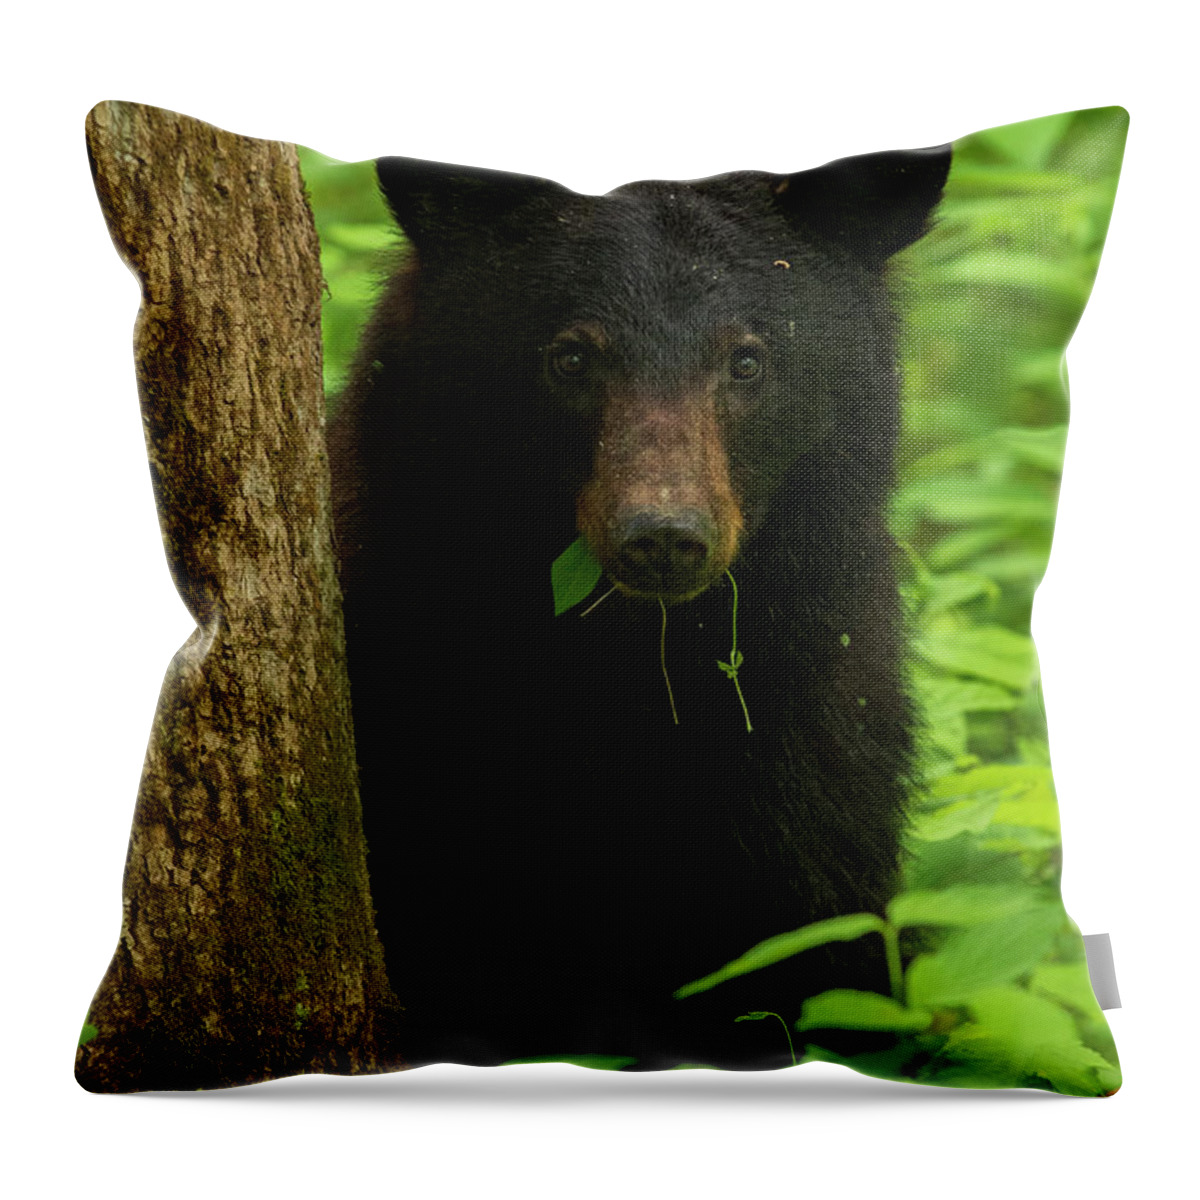 Great Smoky Mountains National Park Throw Pillow featuring the photograph Grazing Black Bear by Melissa Southern